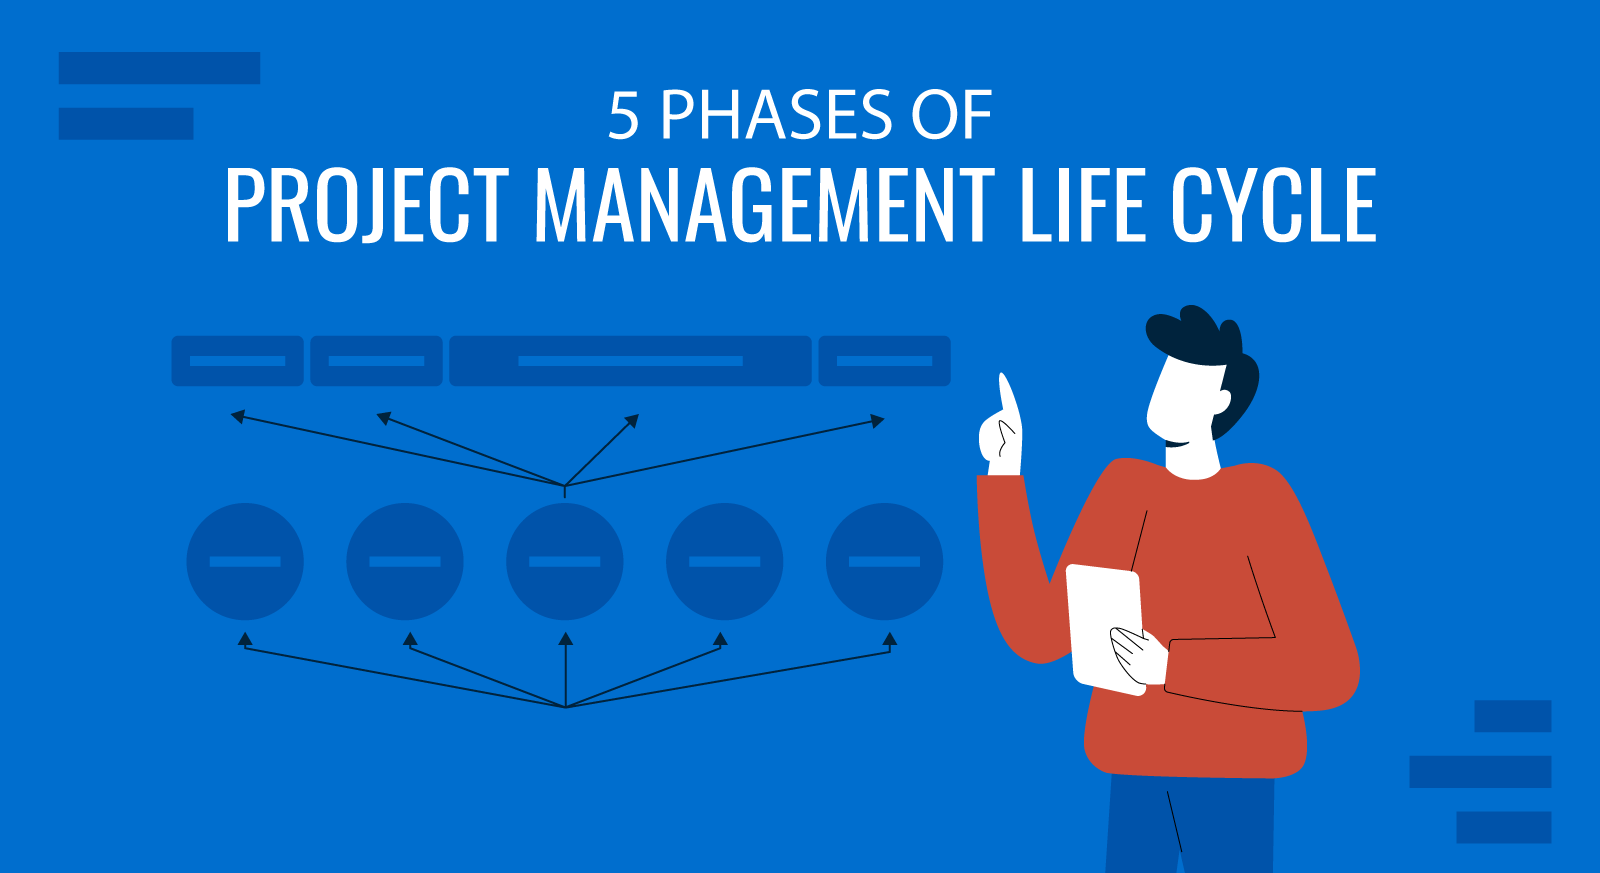 The 5 Main Phases of Project Management Life Cycle